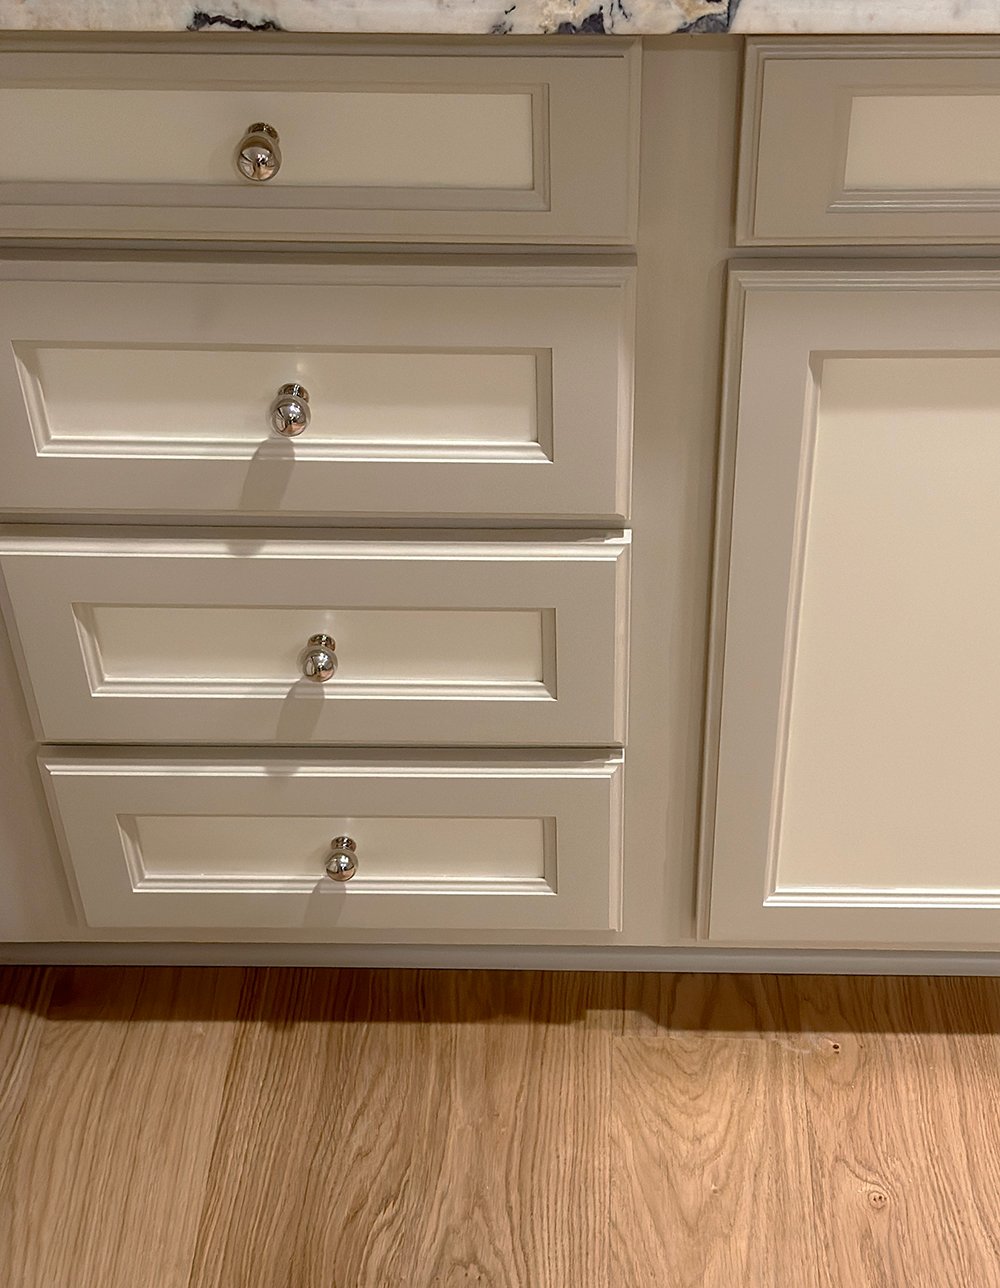 How to Replace & Upgrade Your Cabinet Doors - roomfortuesday.com